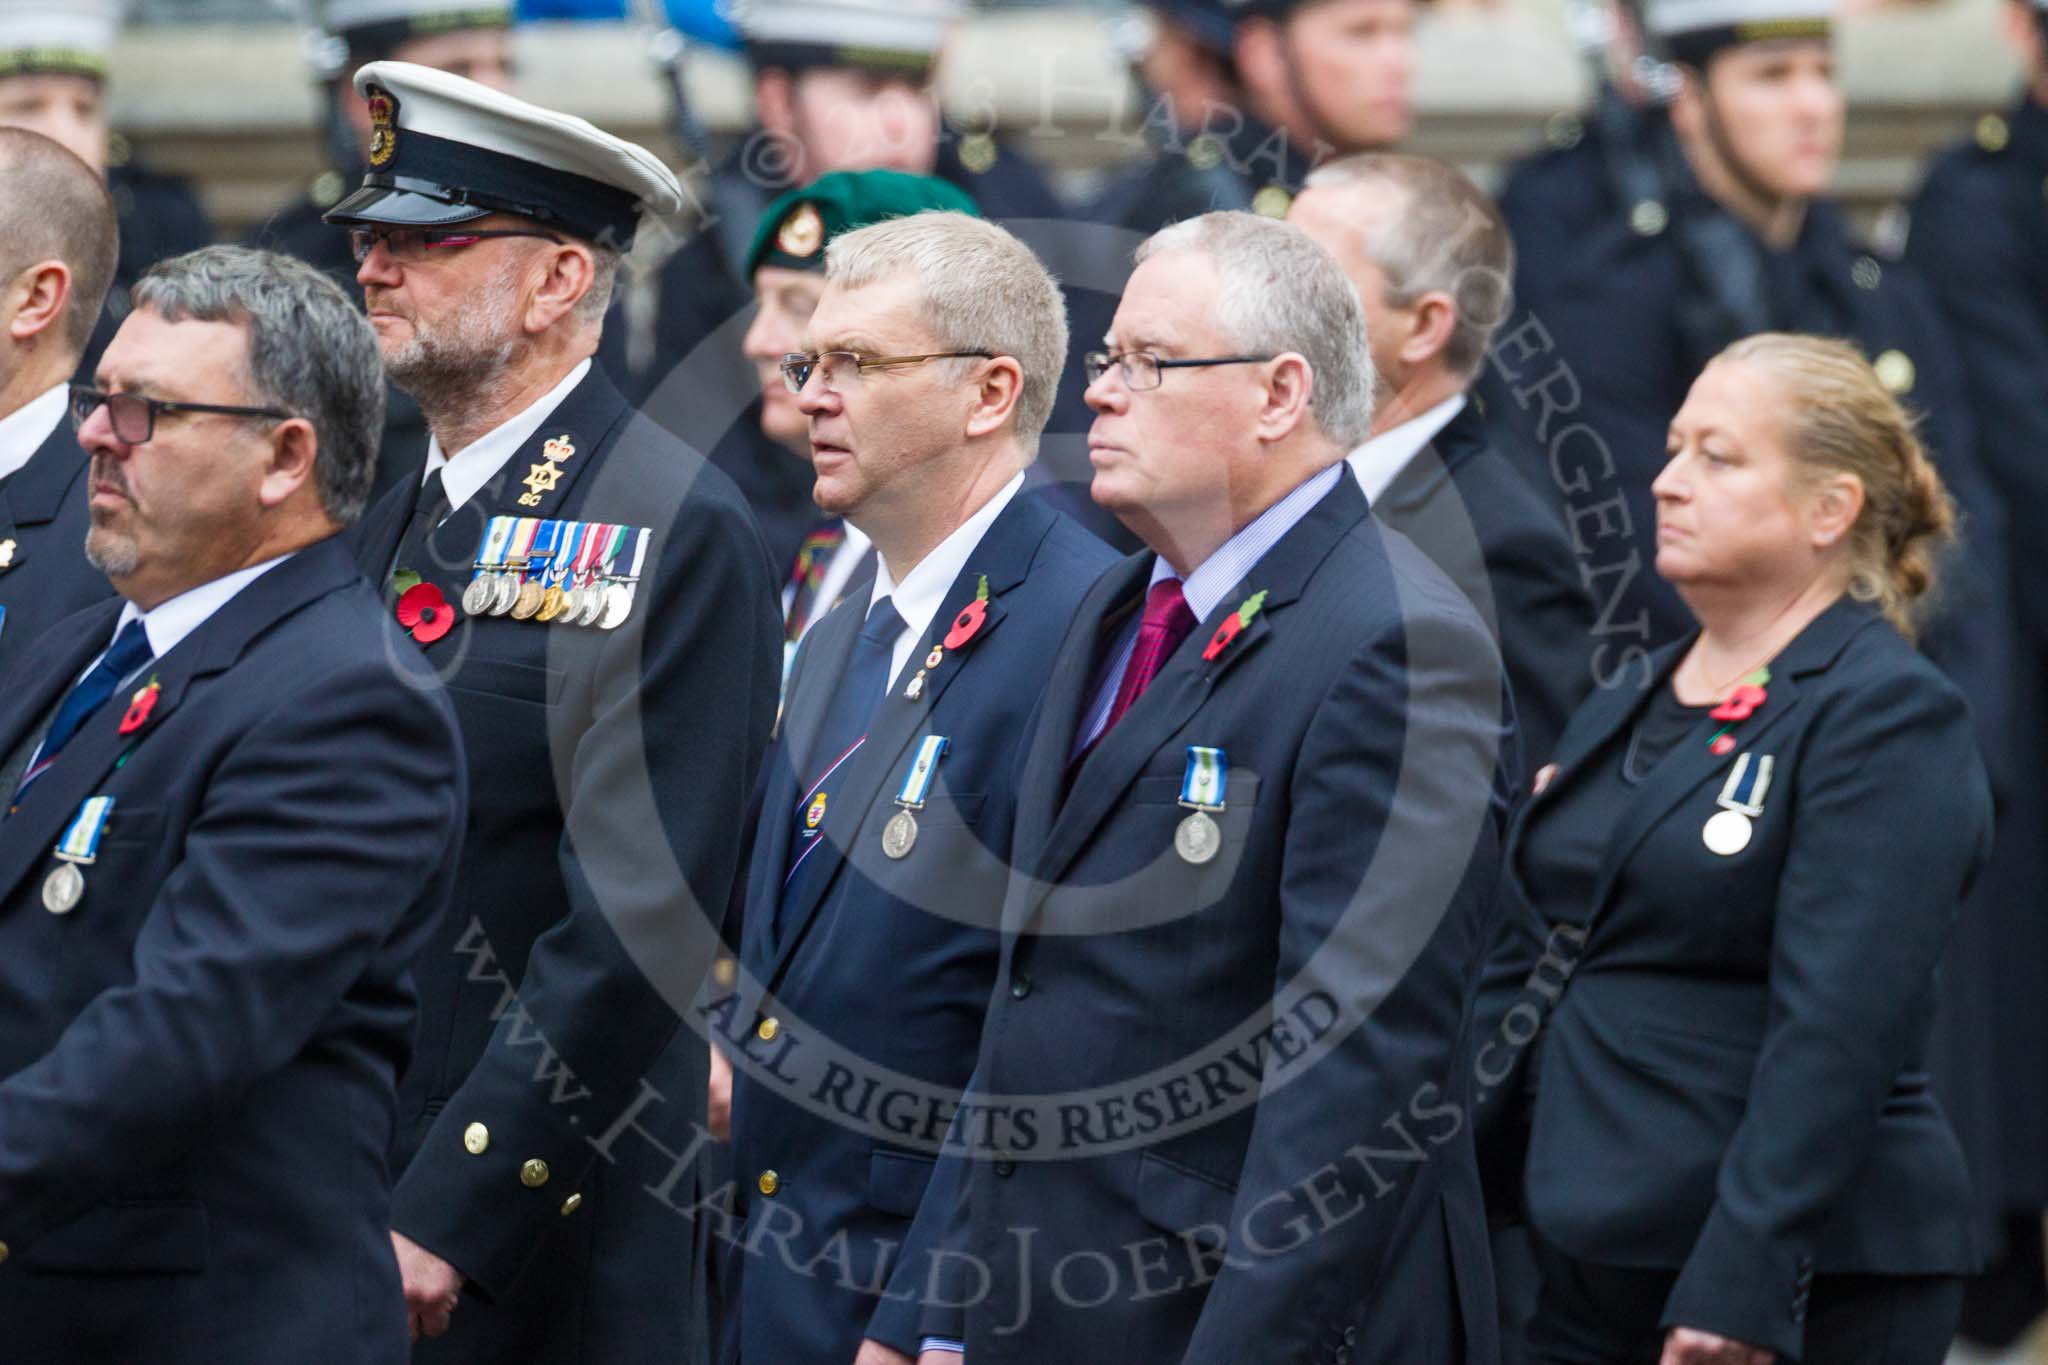 Remembrance Sunday at the Cenotaph 2015: Group E27, Broadsword Association.
Cenotaph, Whitehall, London SW1,
London,
Greater London,
United Kingdom,
on 08 November 2015 at 12:02, image #947